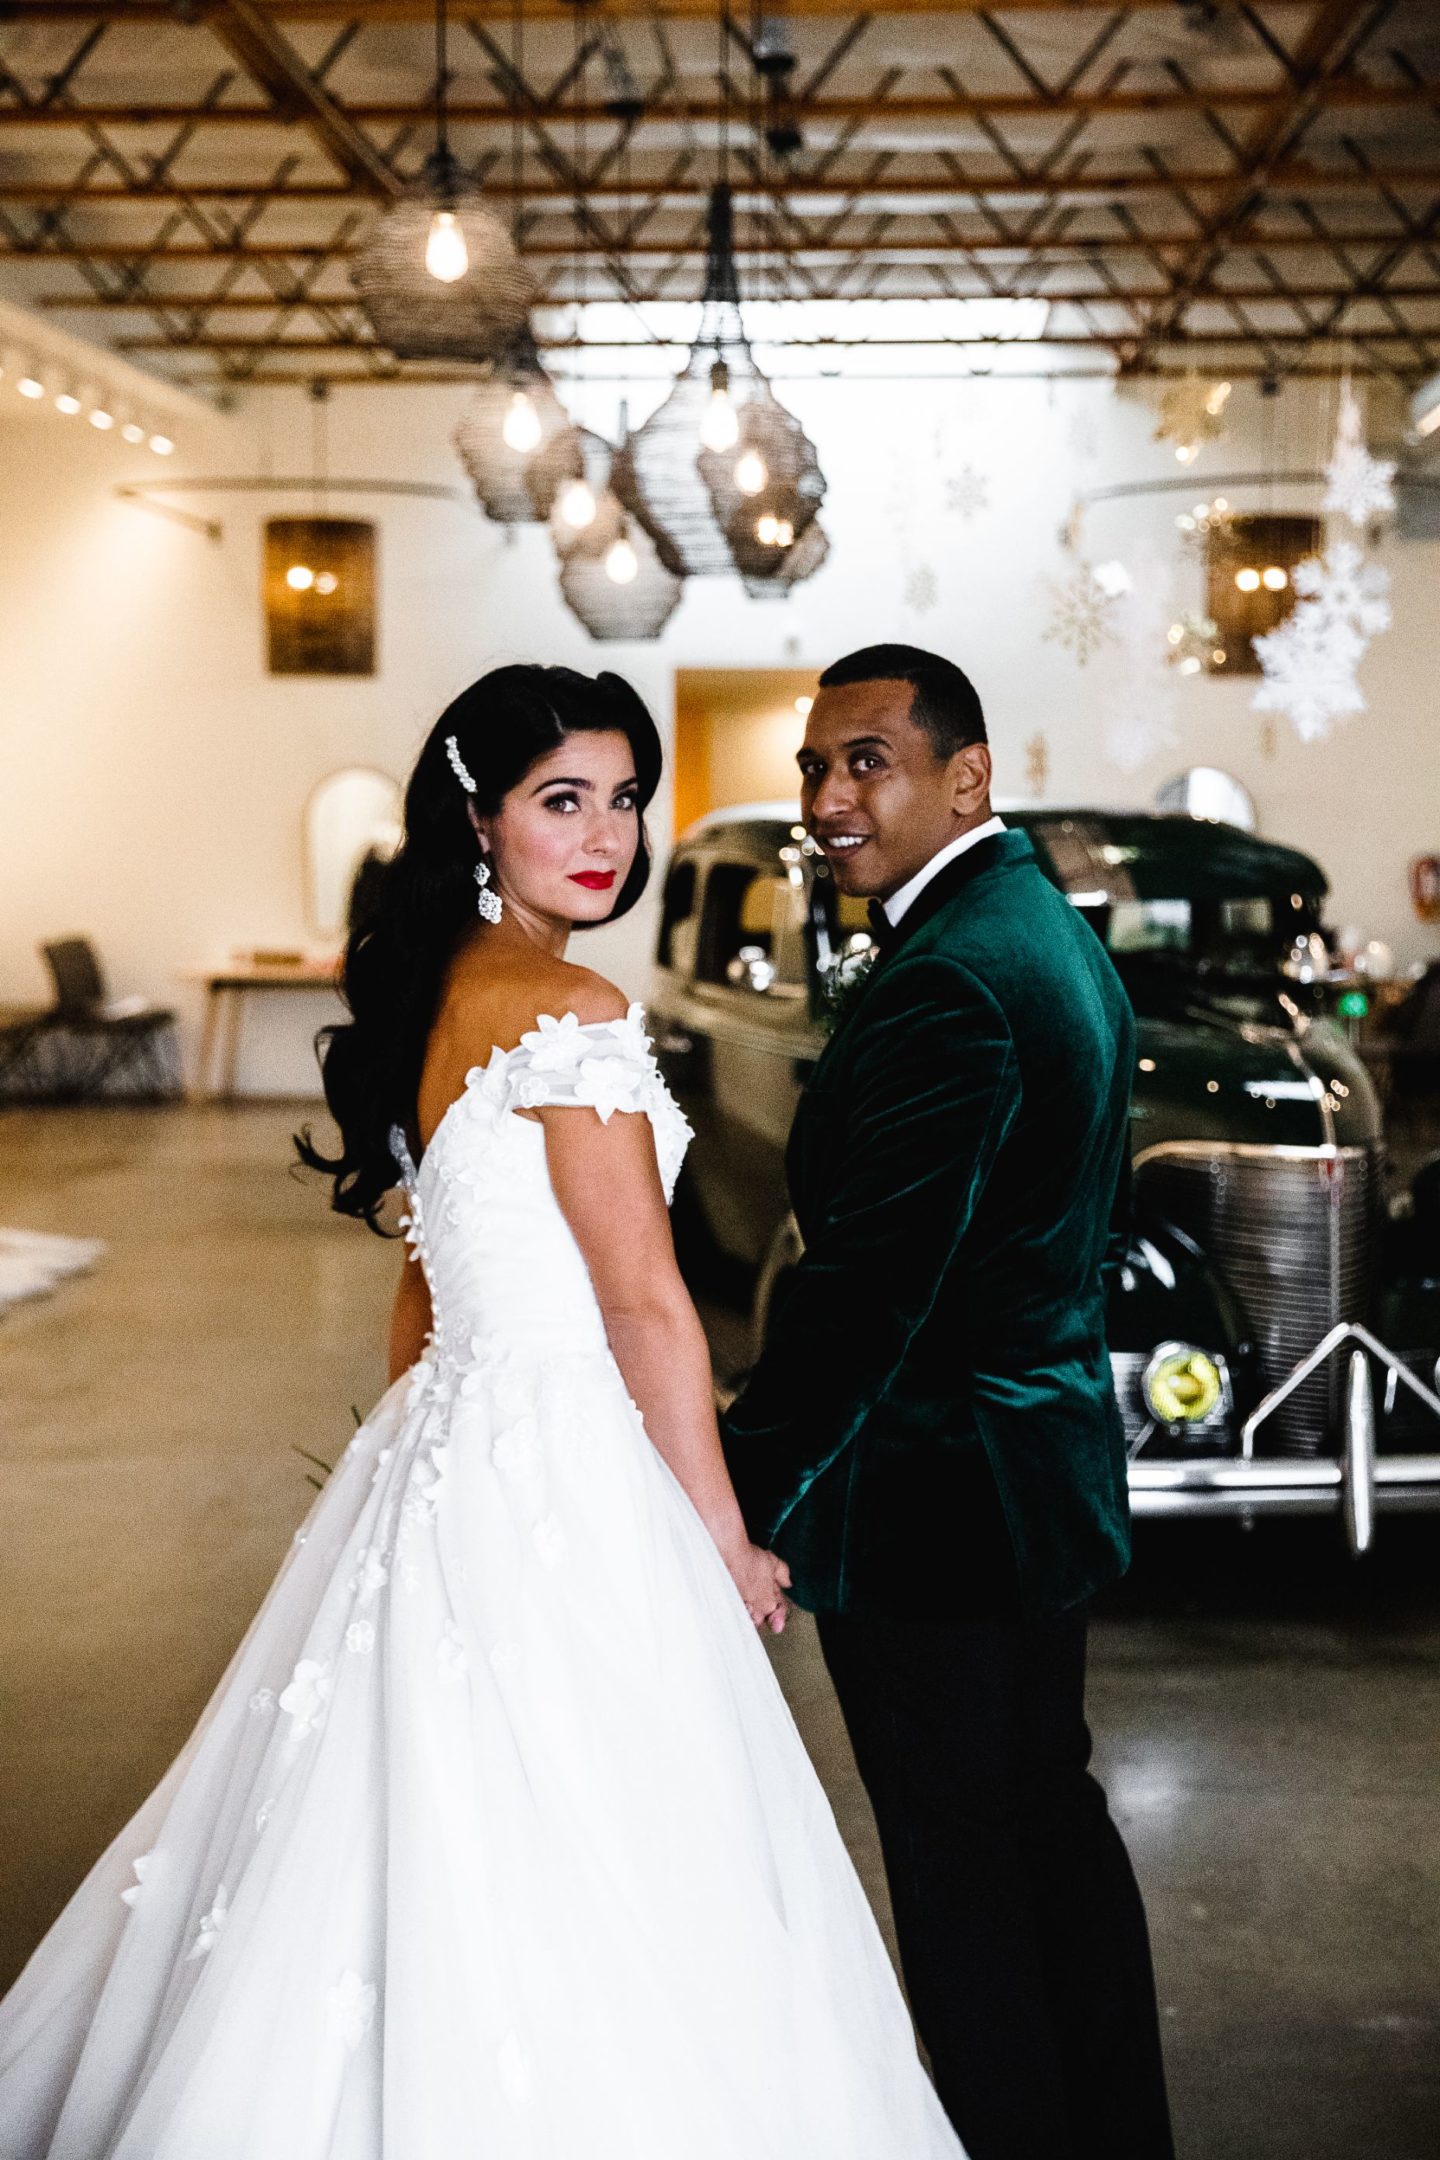 Retro Christmas Wedding With Red and Green Styling at Pop Up Shot Club, USA